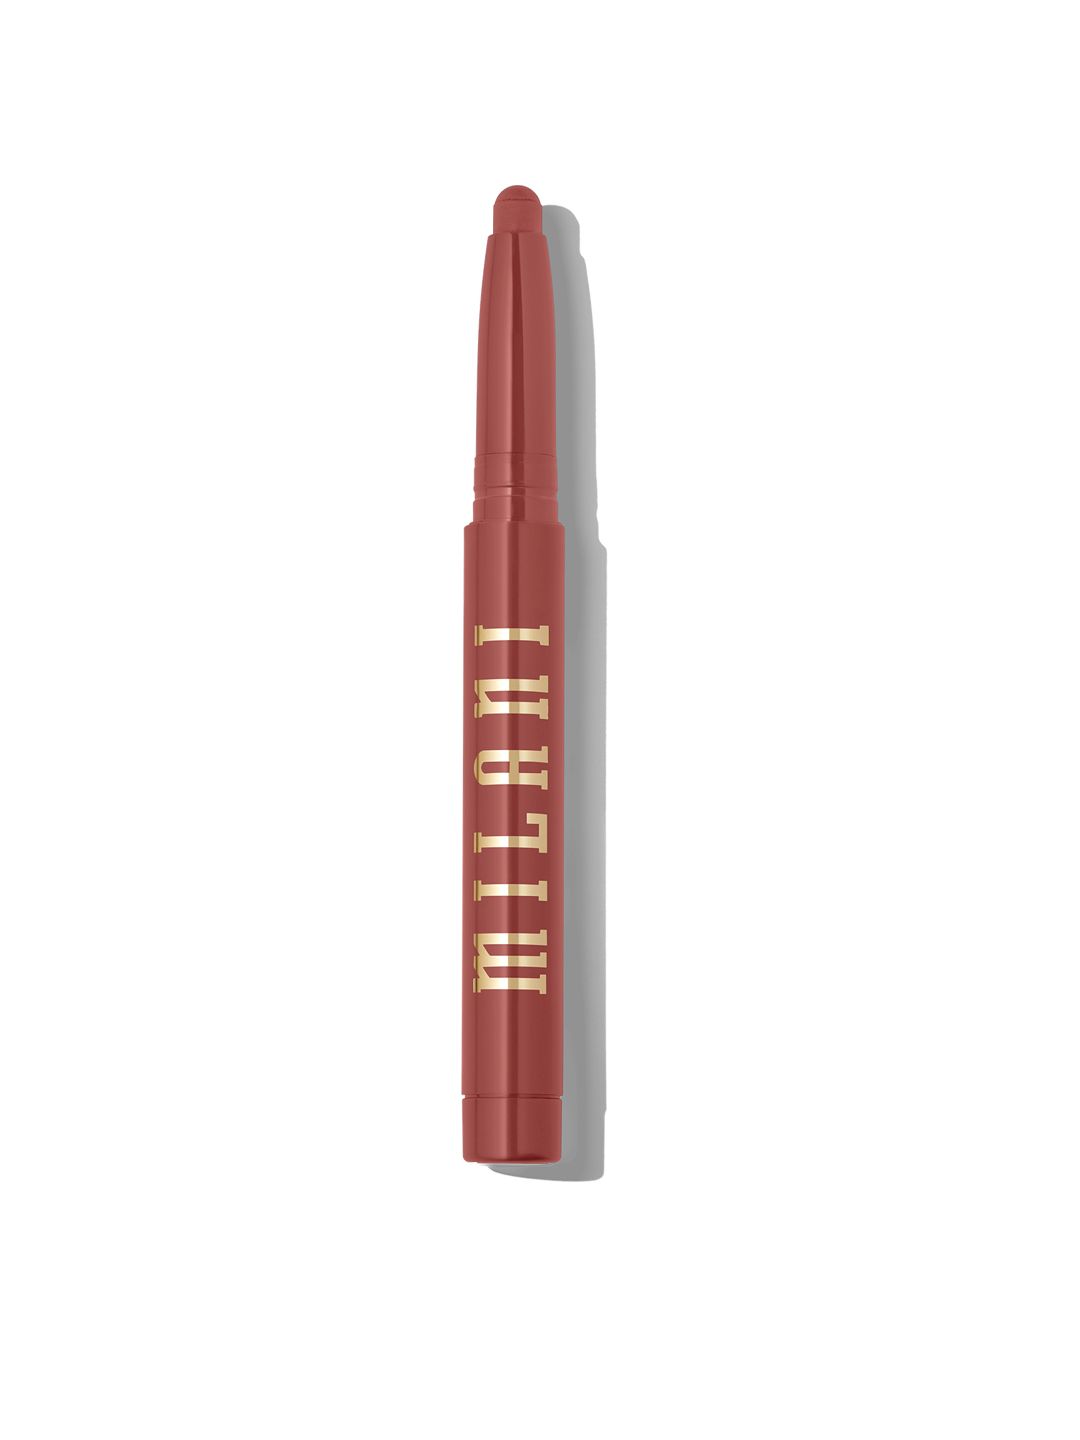 MILANI Ludicrous Matte Lip Crayon - Crazy For You 130 Price in India